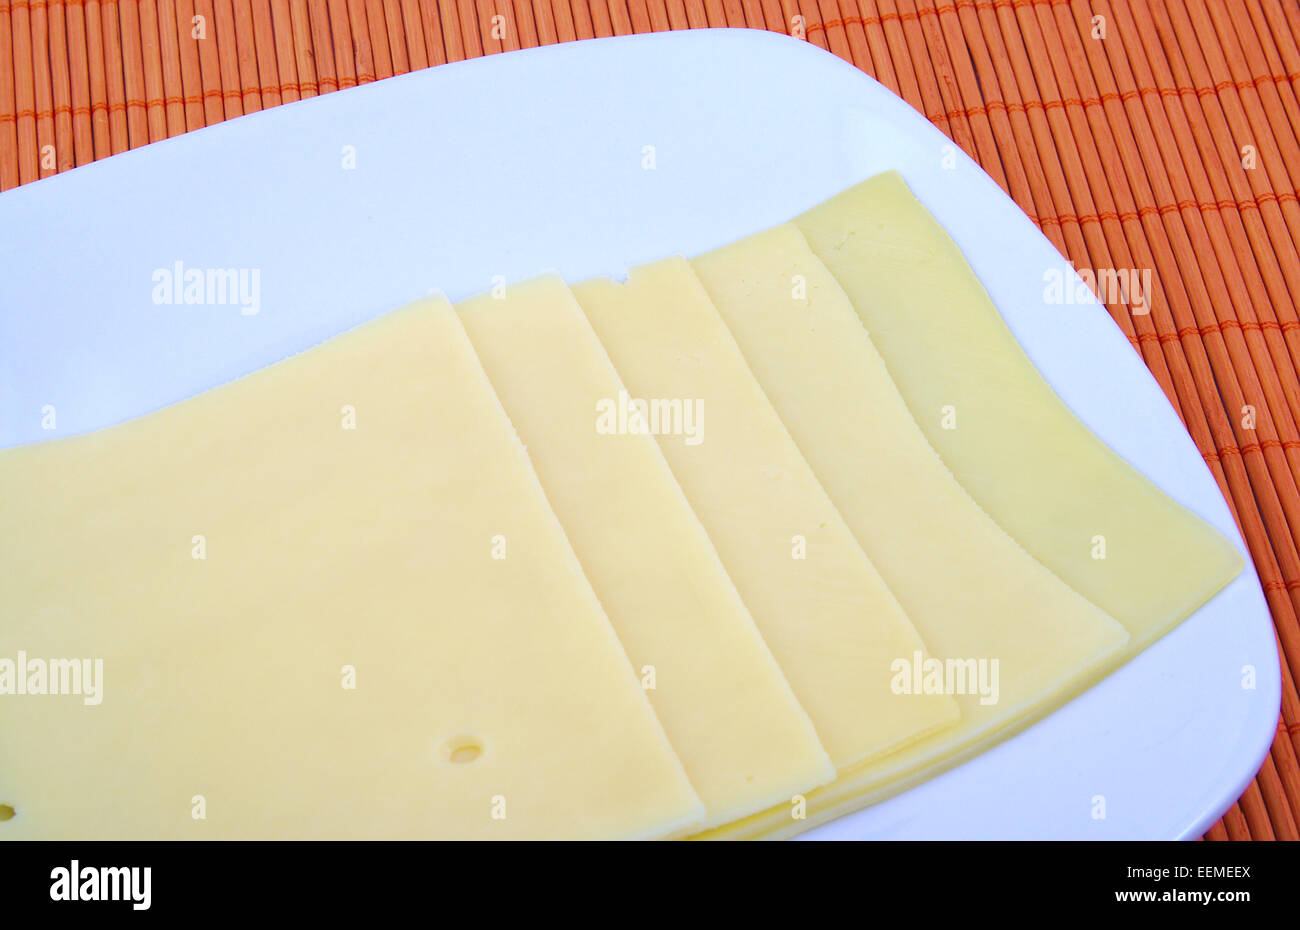 Yellow cheese slices arranged on a white dish Stock Photo